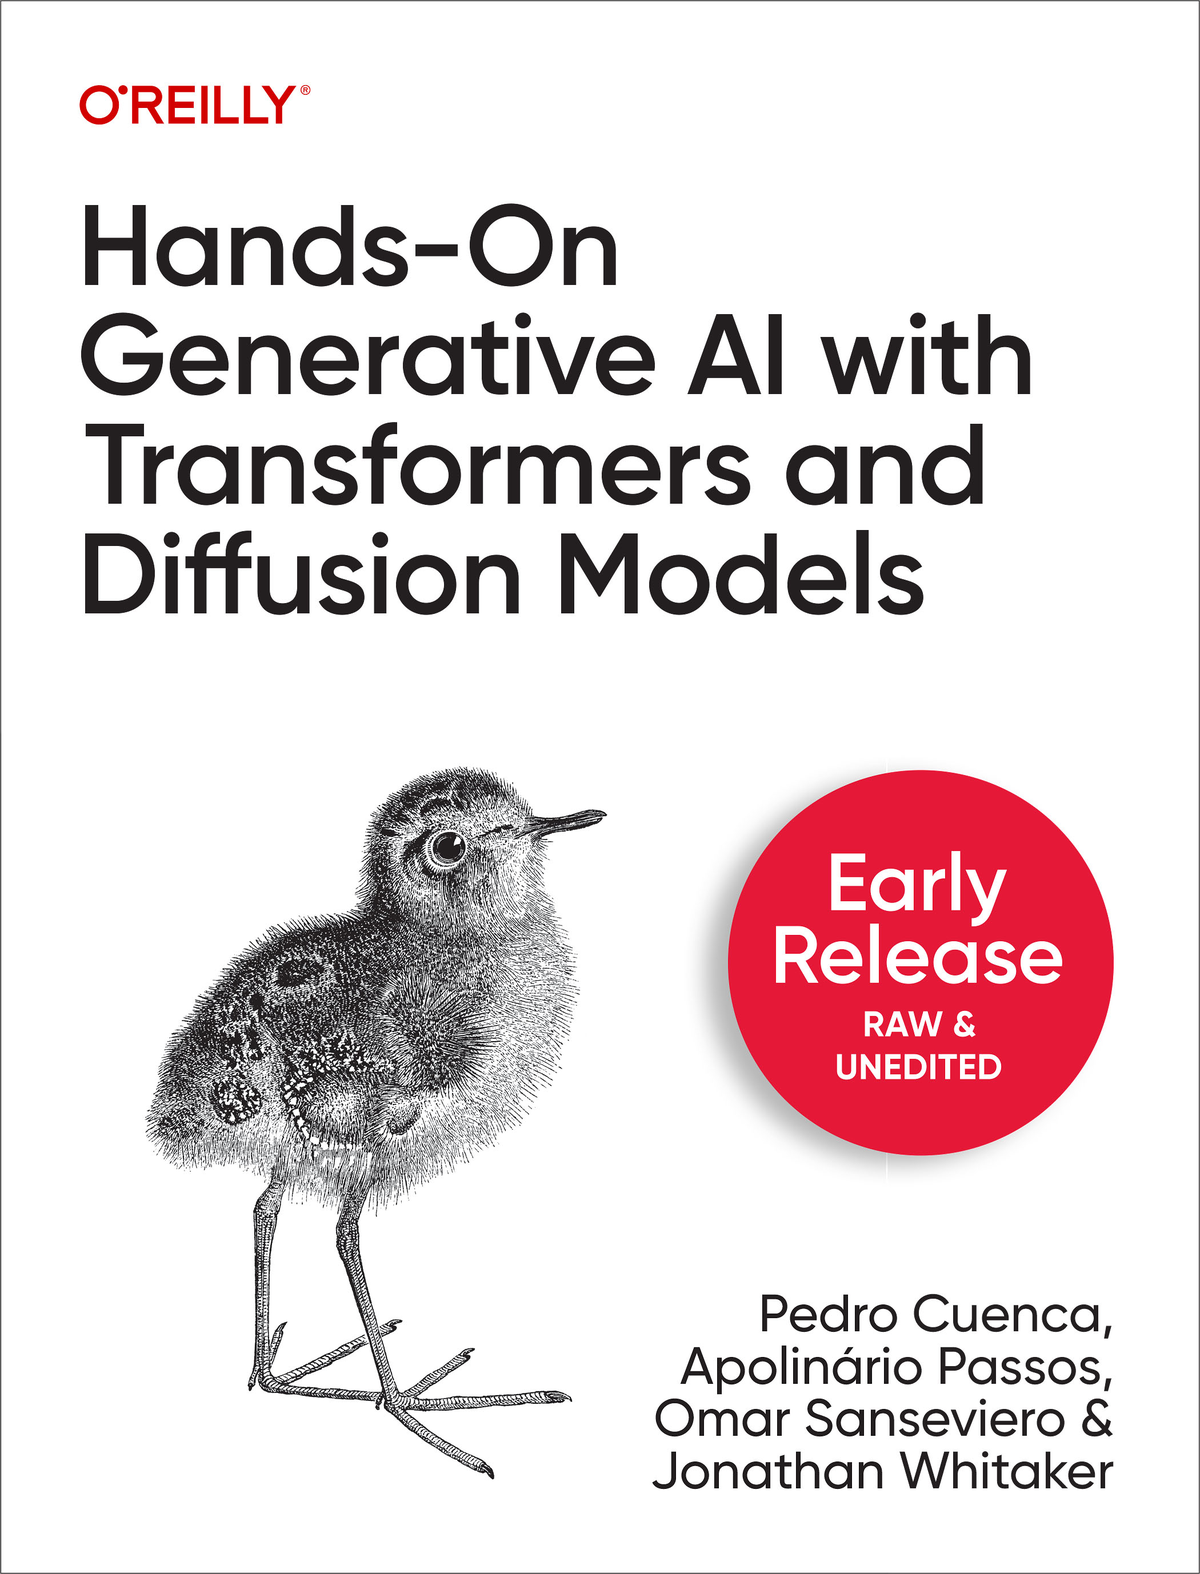 Hands-On Generative AI with Transformers and Diffusion Models by Pedro Cuenca - photo 1